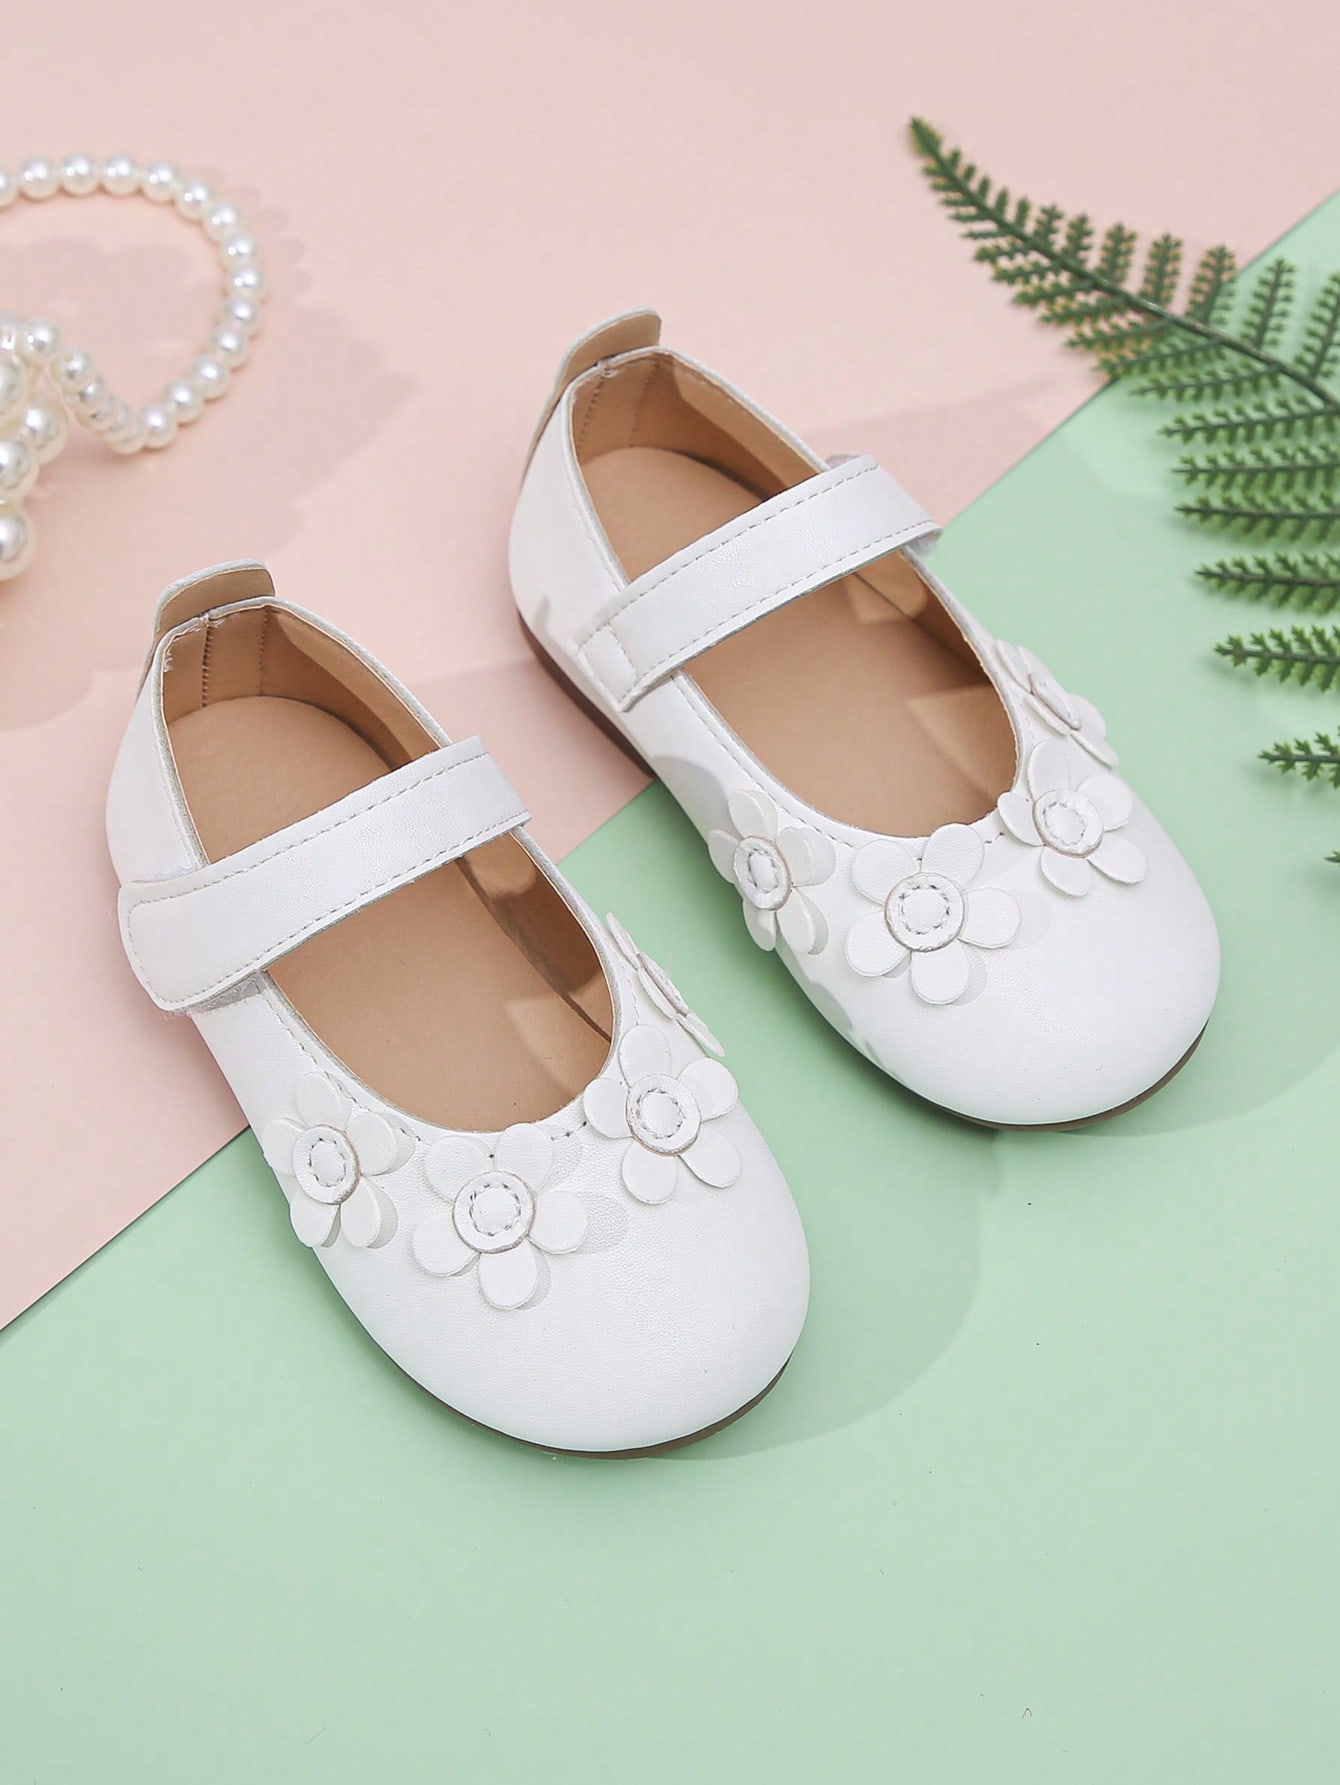 Girls Flower Decor Flats, Sweet & Cute Outdoor Mary Jane Shoes